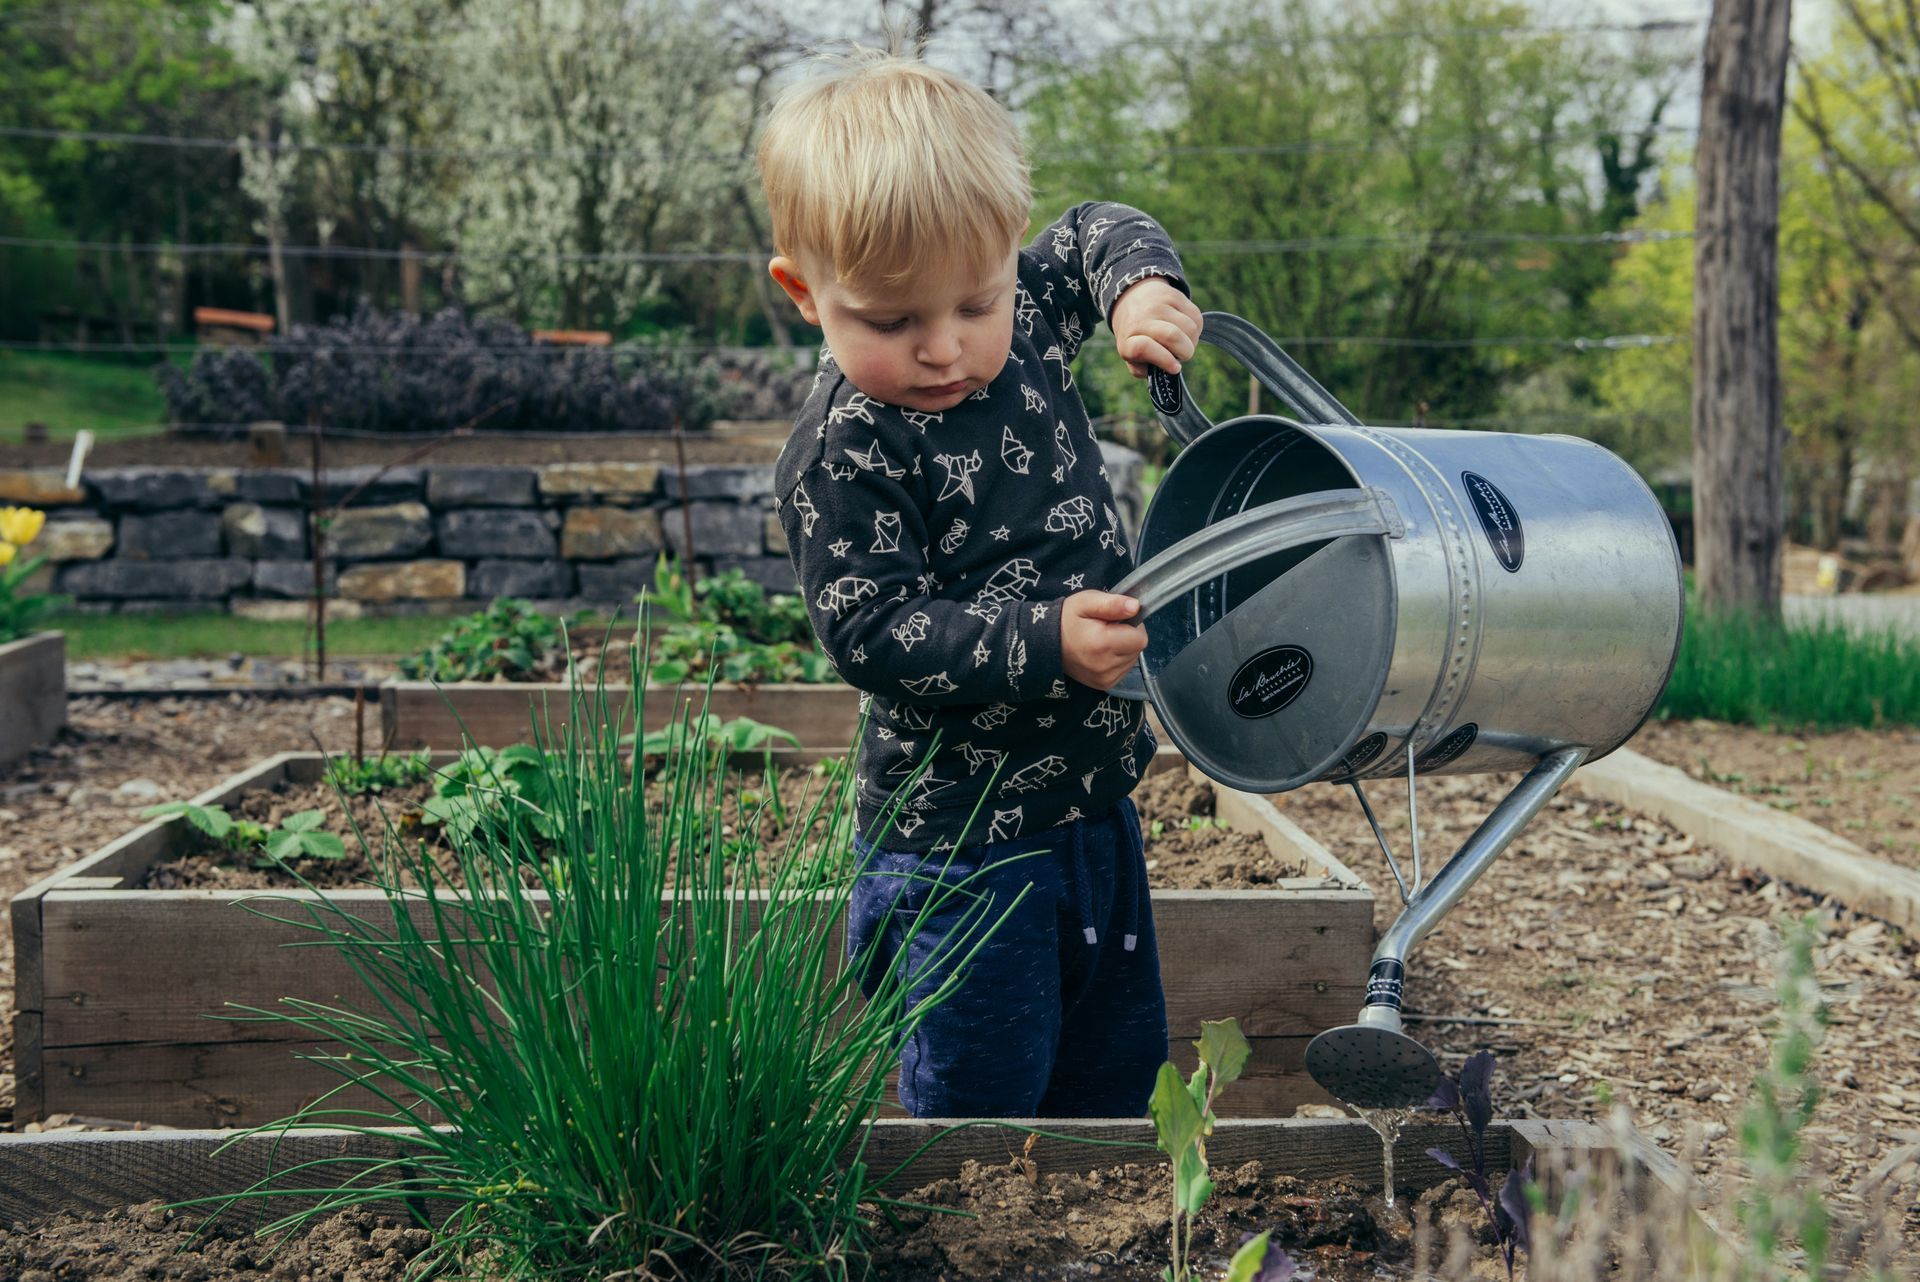 A young boy is watering plants in a garden with a watering can.